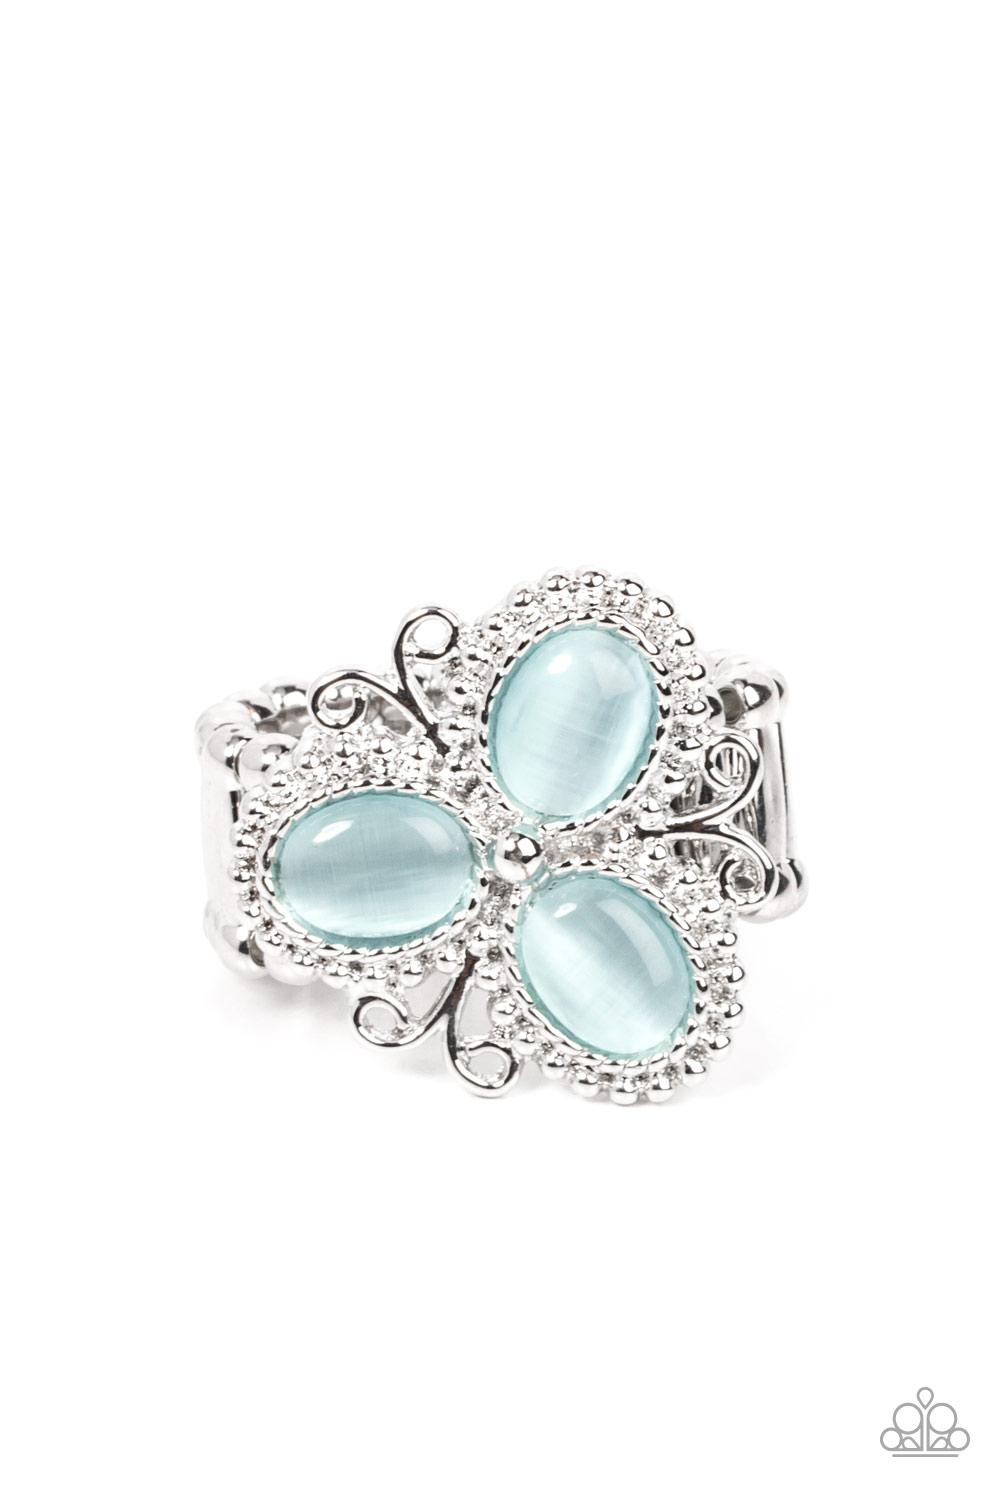 Ring - Bewitched Blossoms - Blue